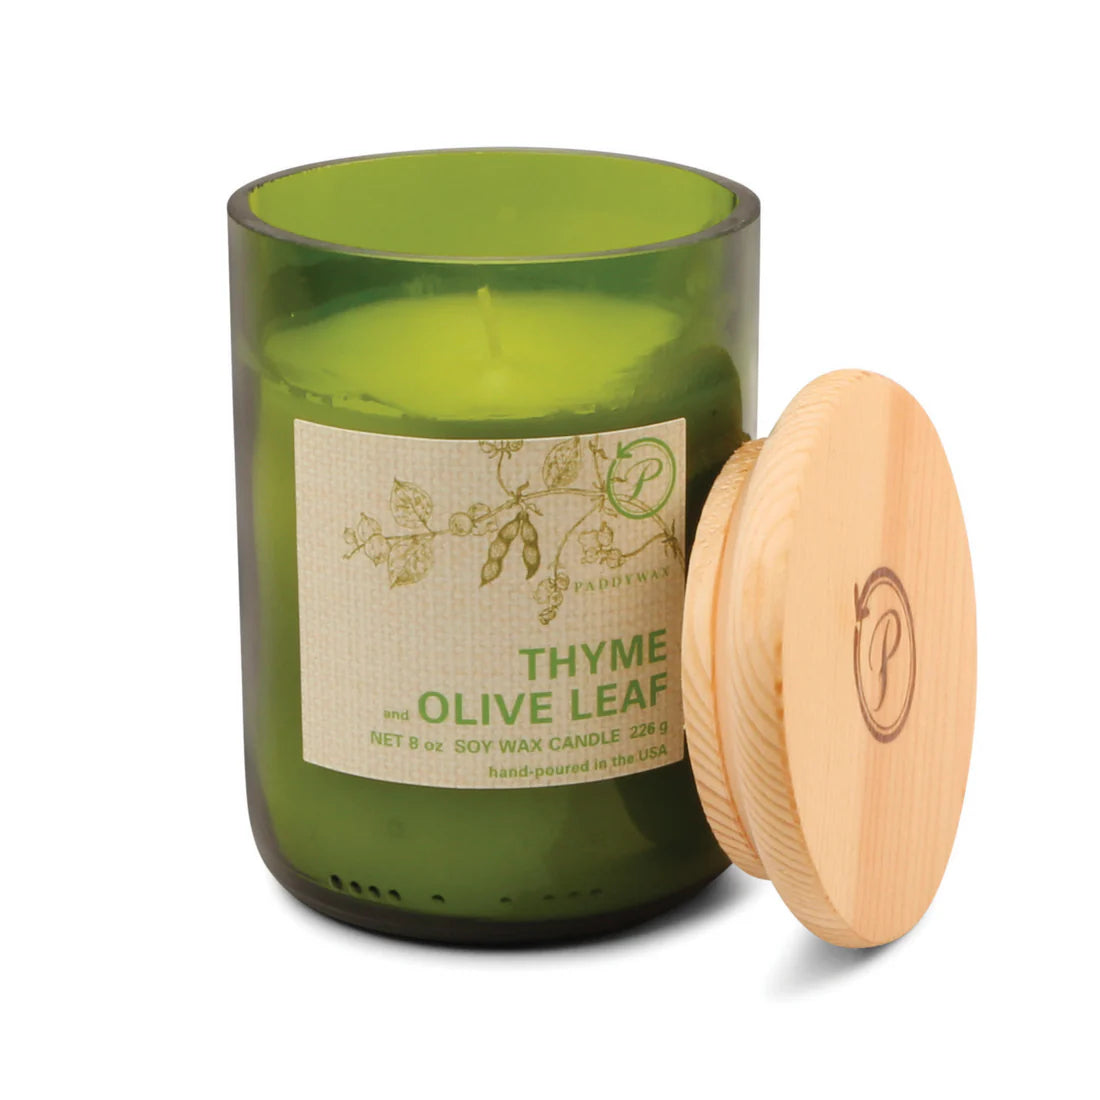 Green Recycled Glass Candle - Thyme + Olive Leaf (226g)